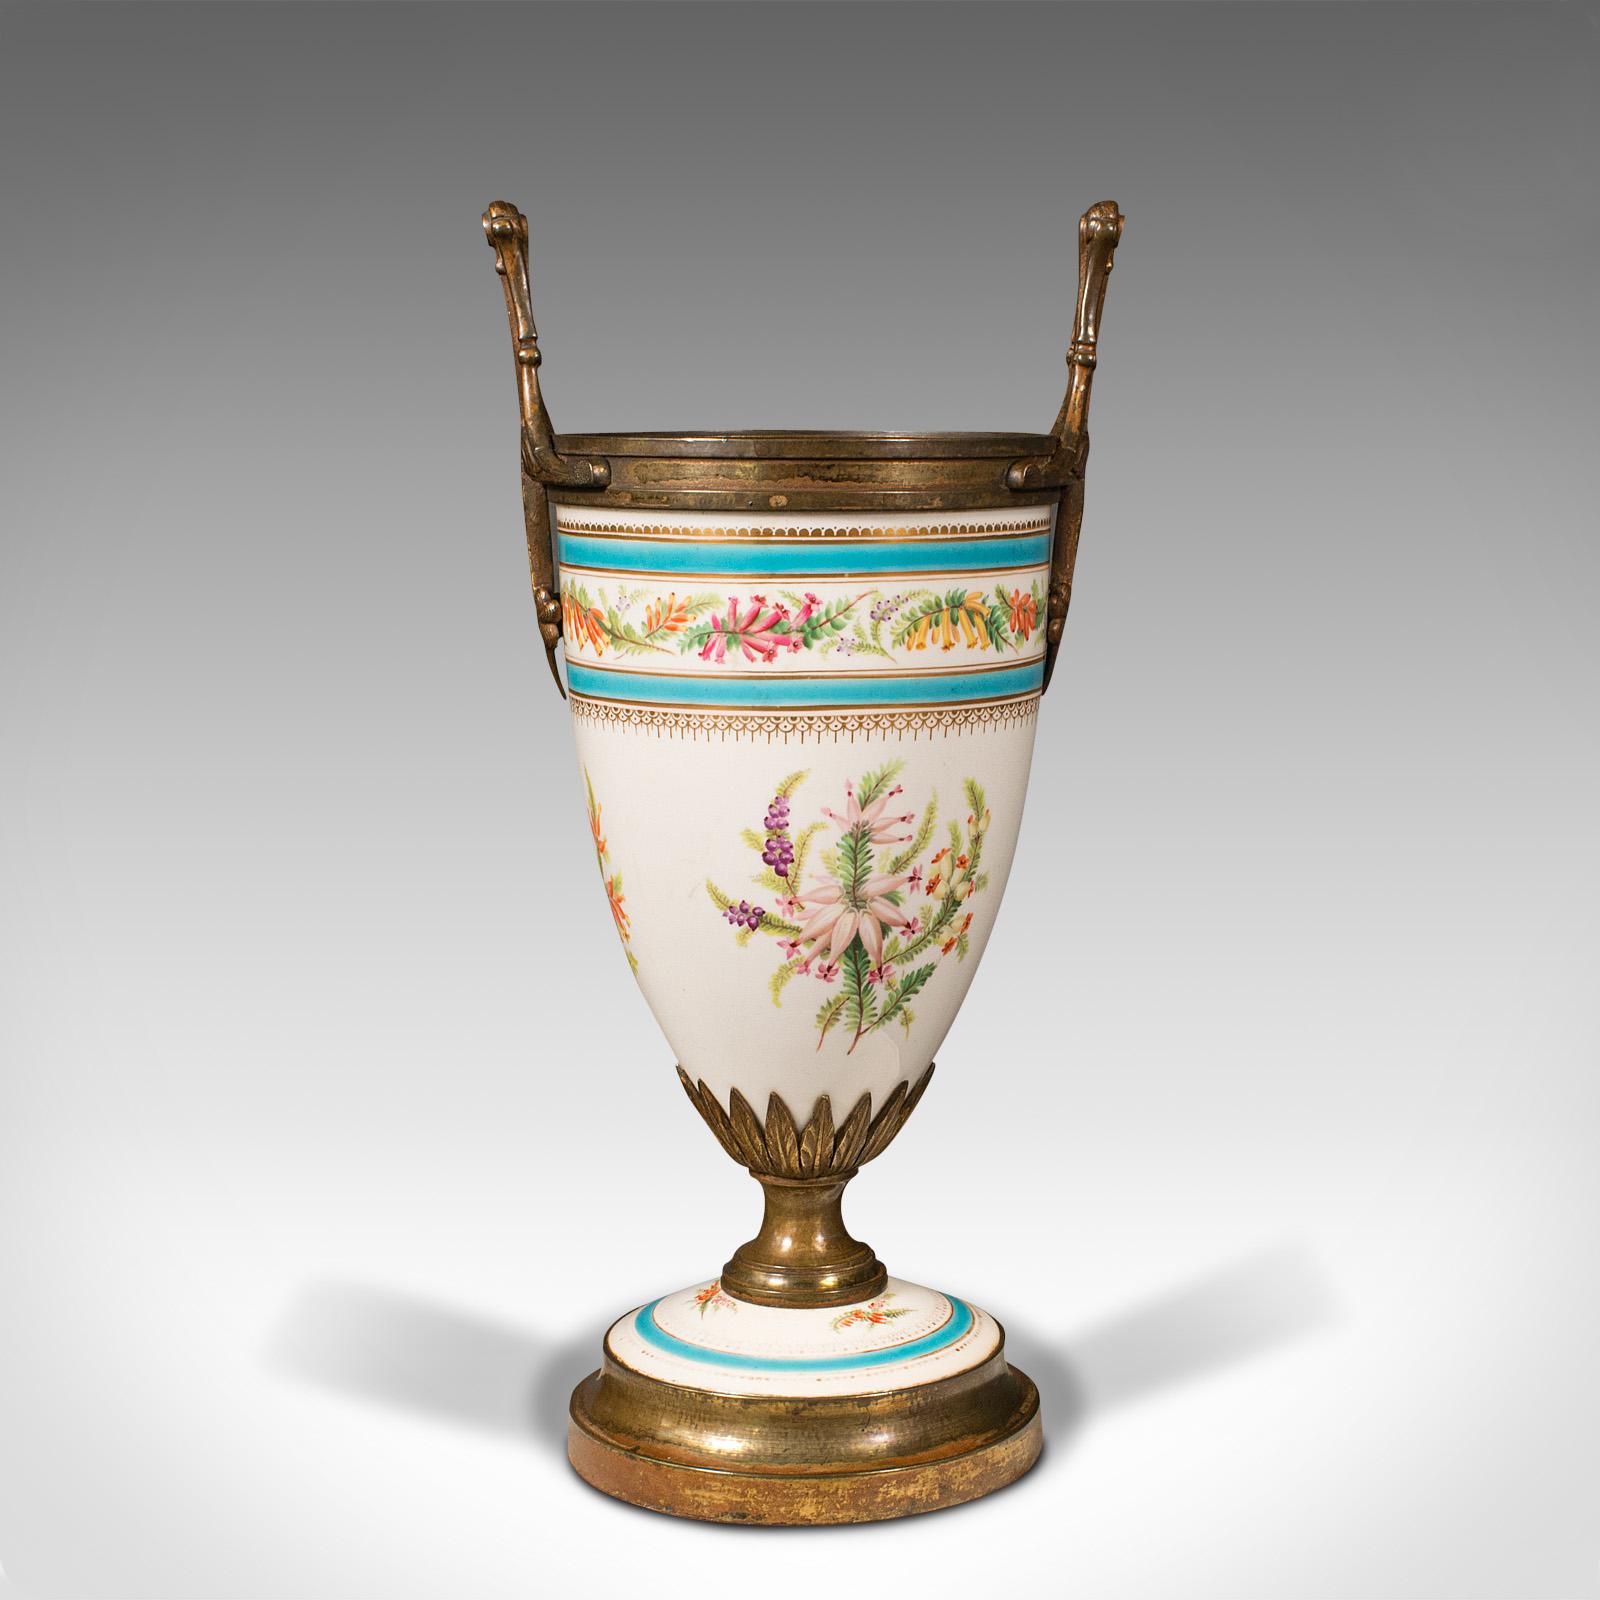 This is an antique mantlepiece jardiniere. A French, ceramic and gilt metal display planter, dating to the late Victorian period, circa 1900.

Distinctive form, with appealing colour and finish
Displays a desirable aged patina and in good